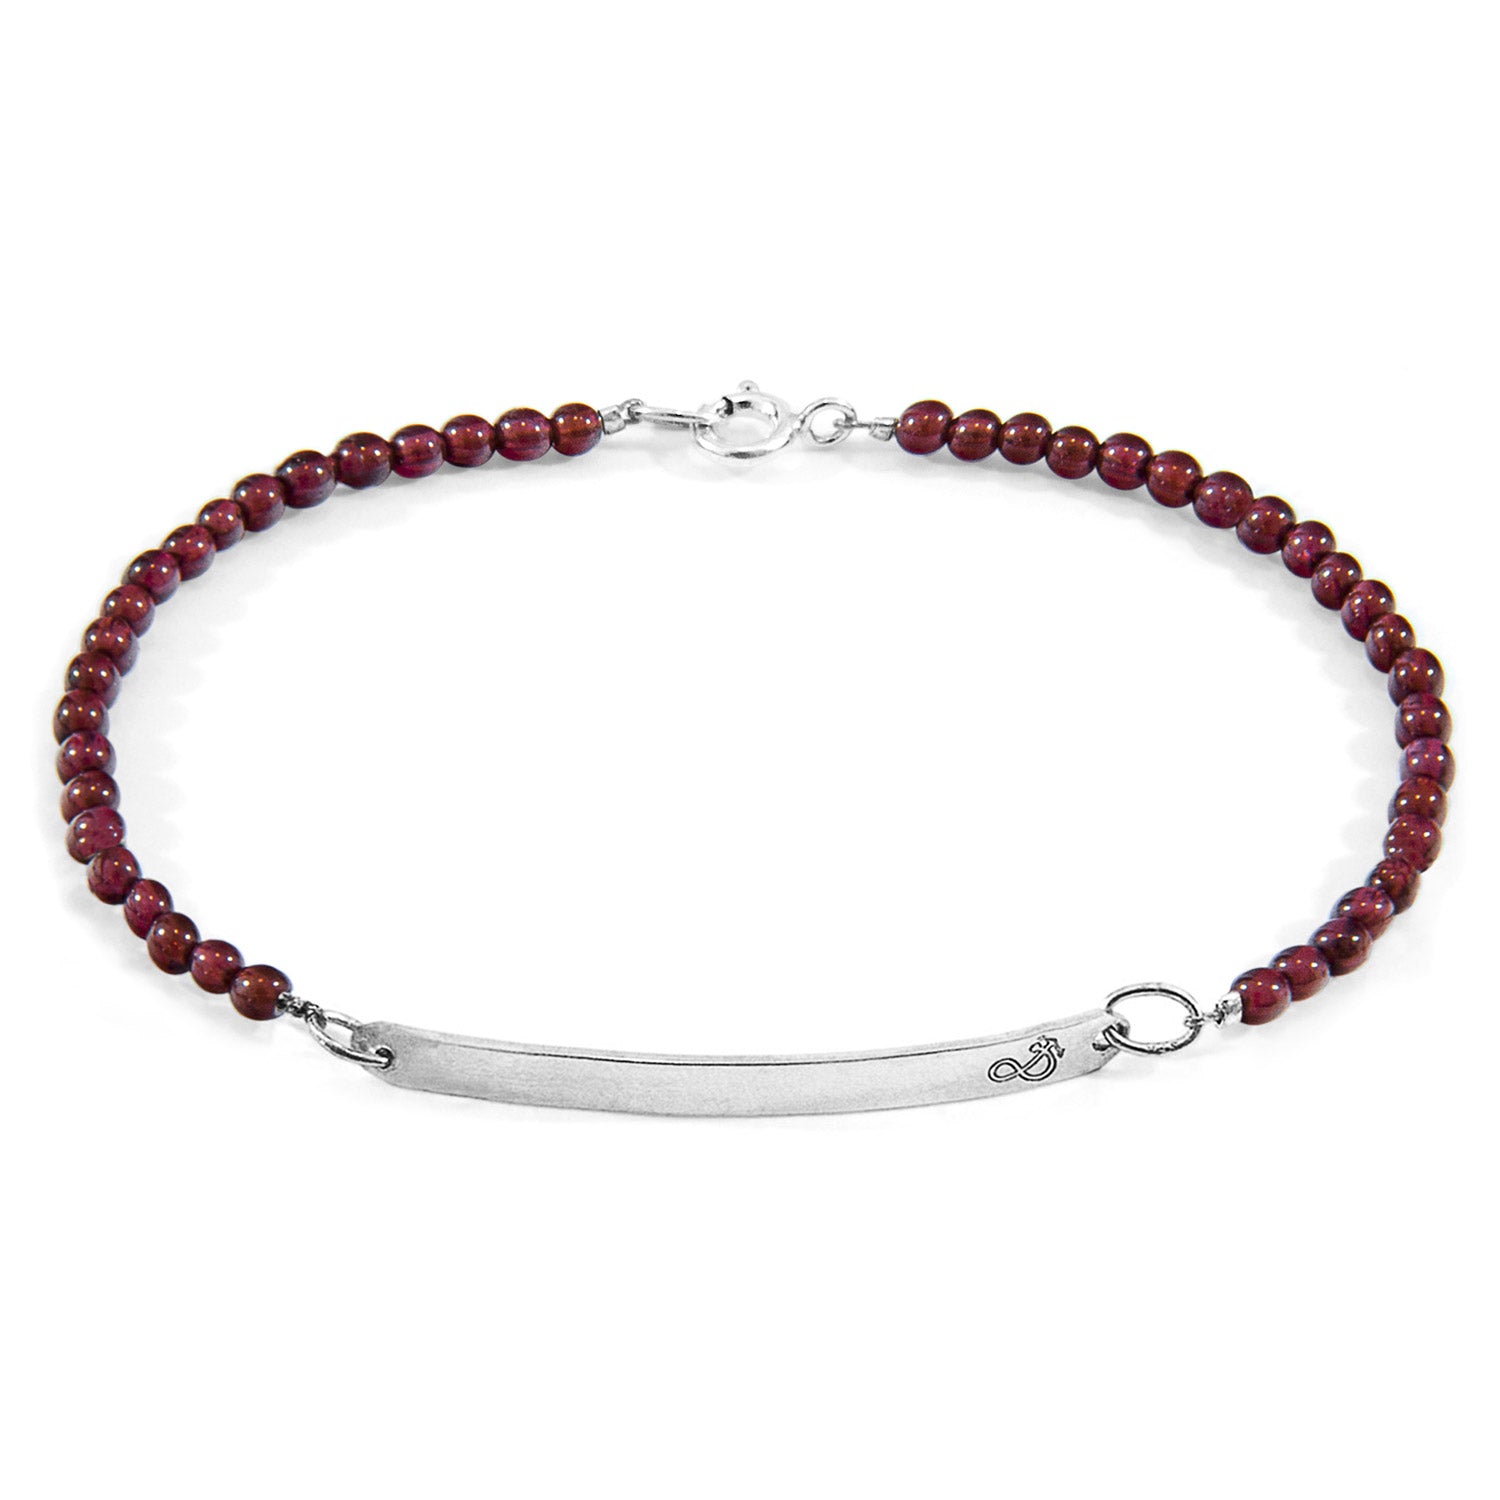 Red Garnet Stone Silver Bracelet - Handcrafted in Great Britain
This minimalist bracelet features genuine 3mm red garnet stone beads on semi-rigid stainless steel wire, with a solid .925 sterling silver curved bar and lobster clasp. Available in 4 - Jewelry & Watches - Bijou Her -  -  - 